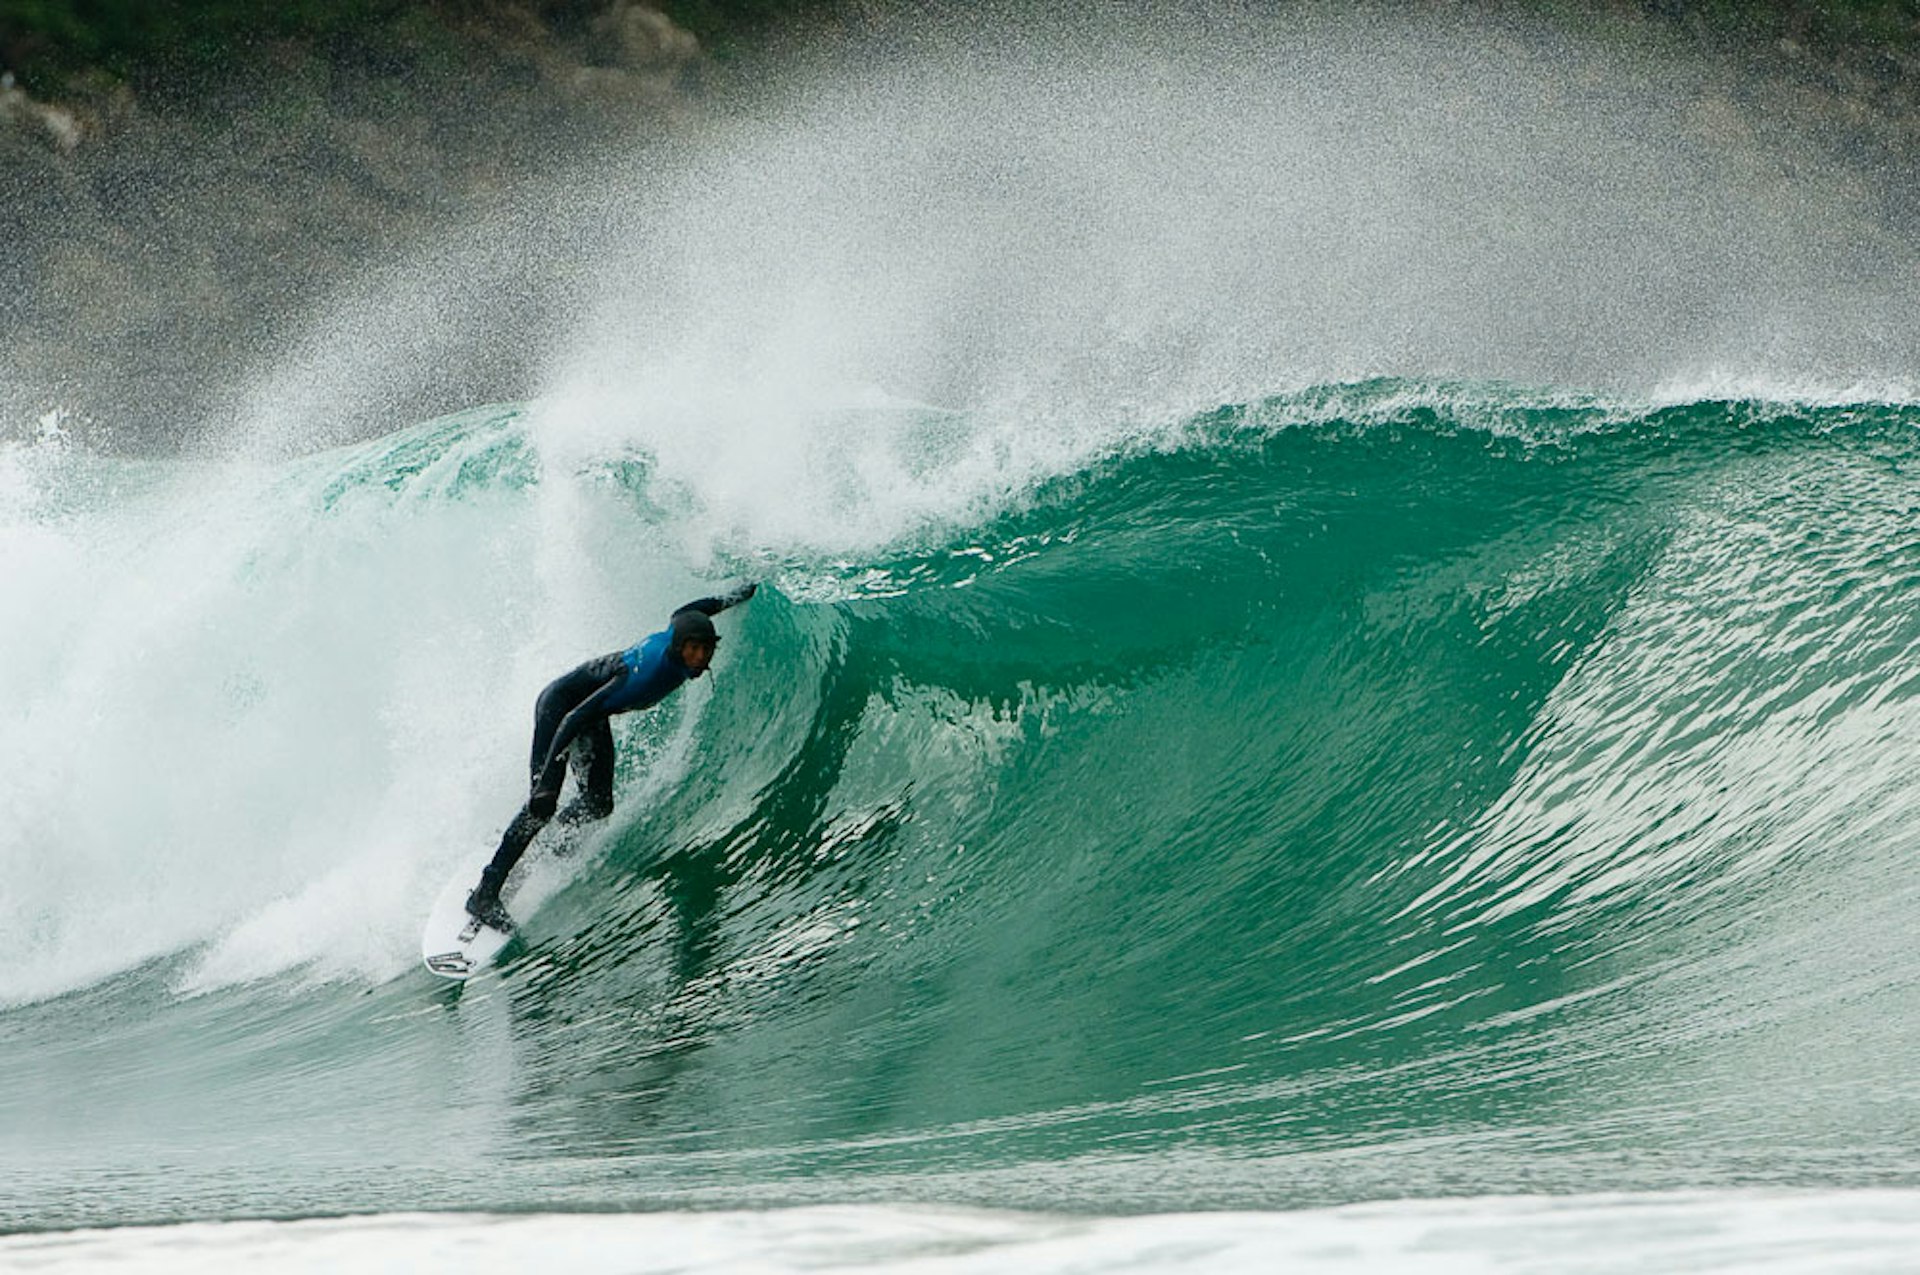 Is pro surfing at risk of a doping scandal?